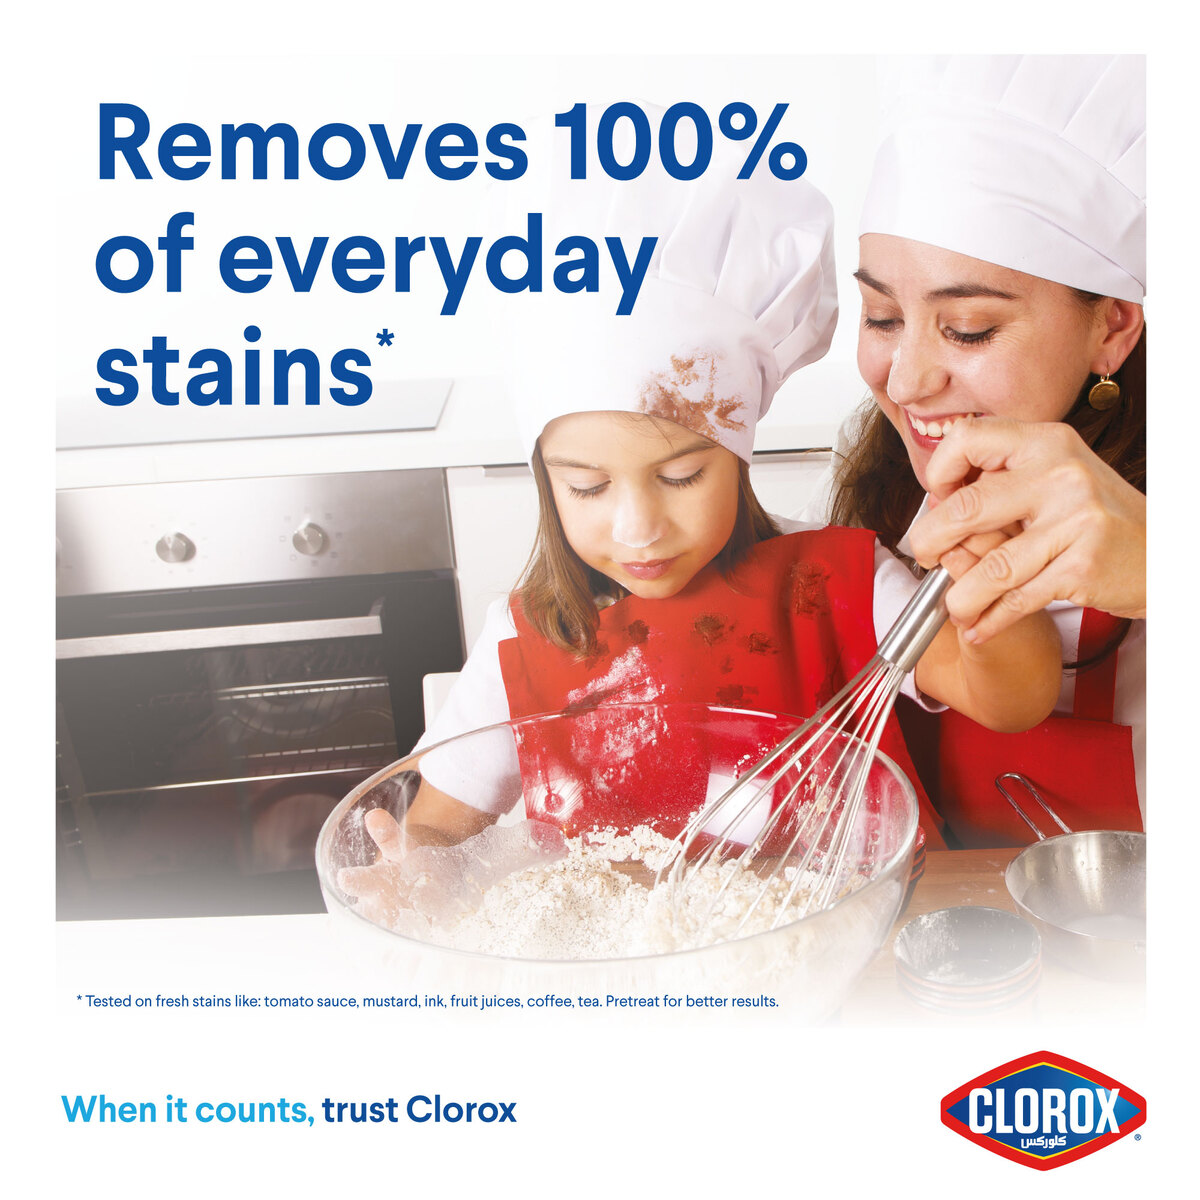 Clorox Liquid Stain Remover & Color Booster For Colored Clothes 1.8 Litres